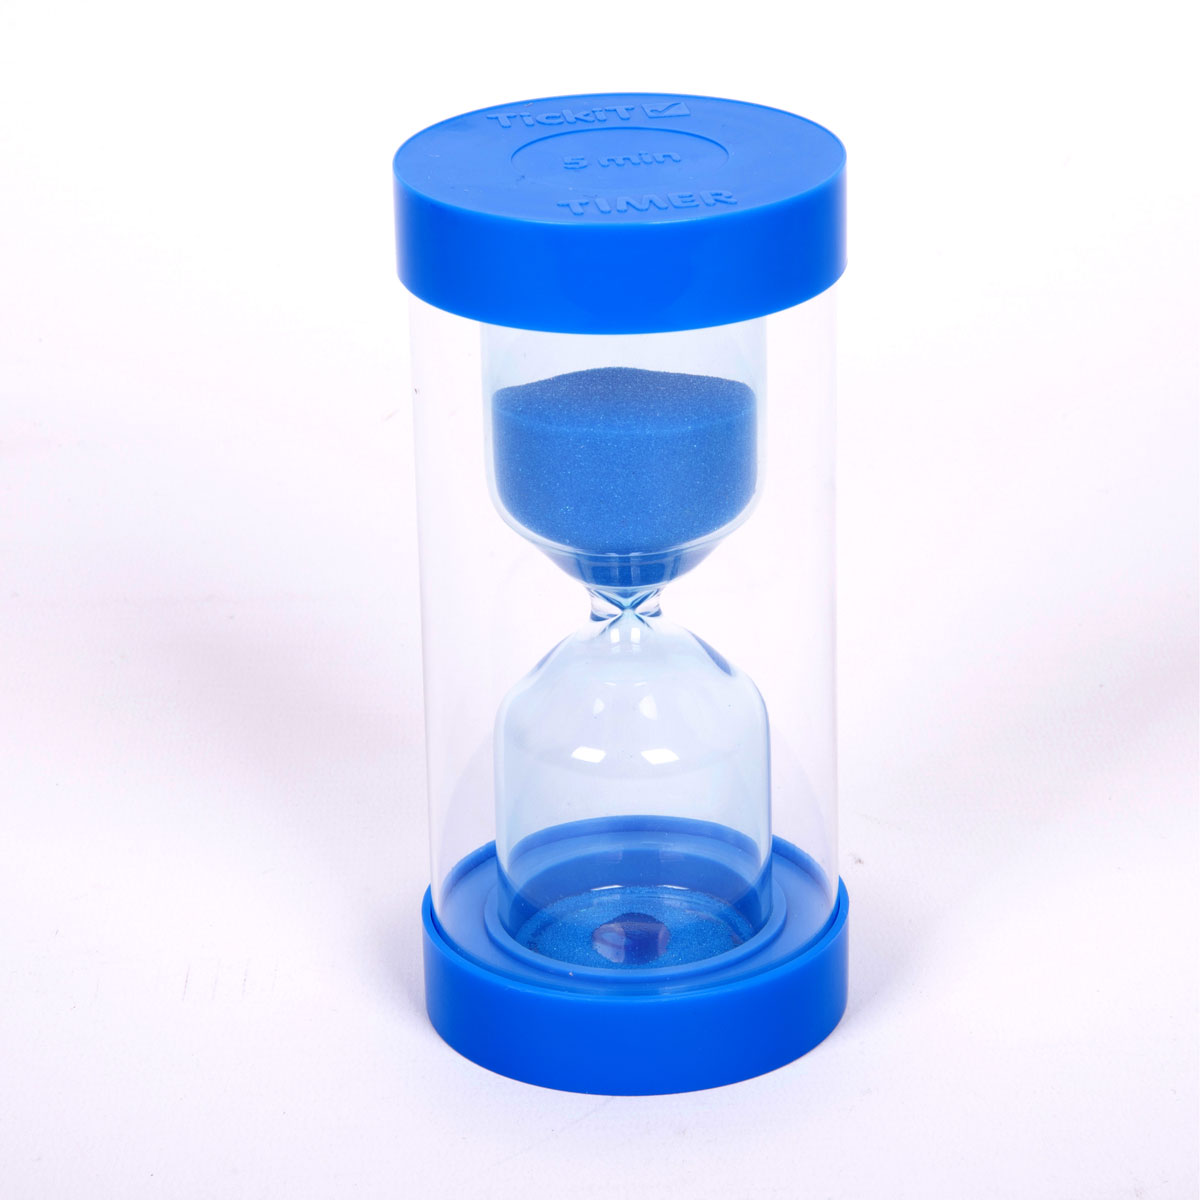 Colourbright Large Sand Timer 5 Minute Blue Cd92117 Primary Ict